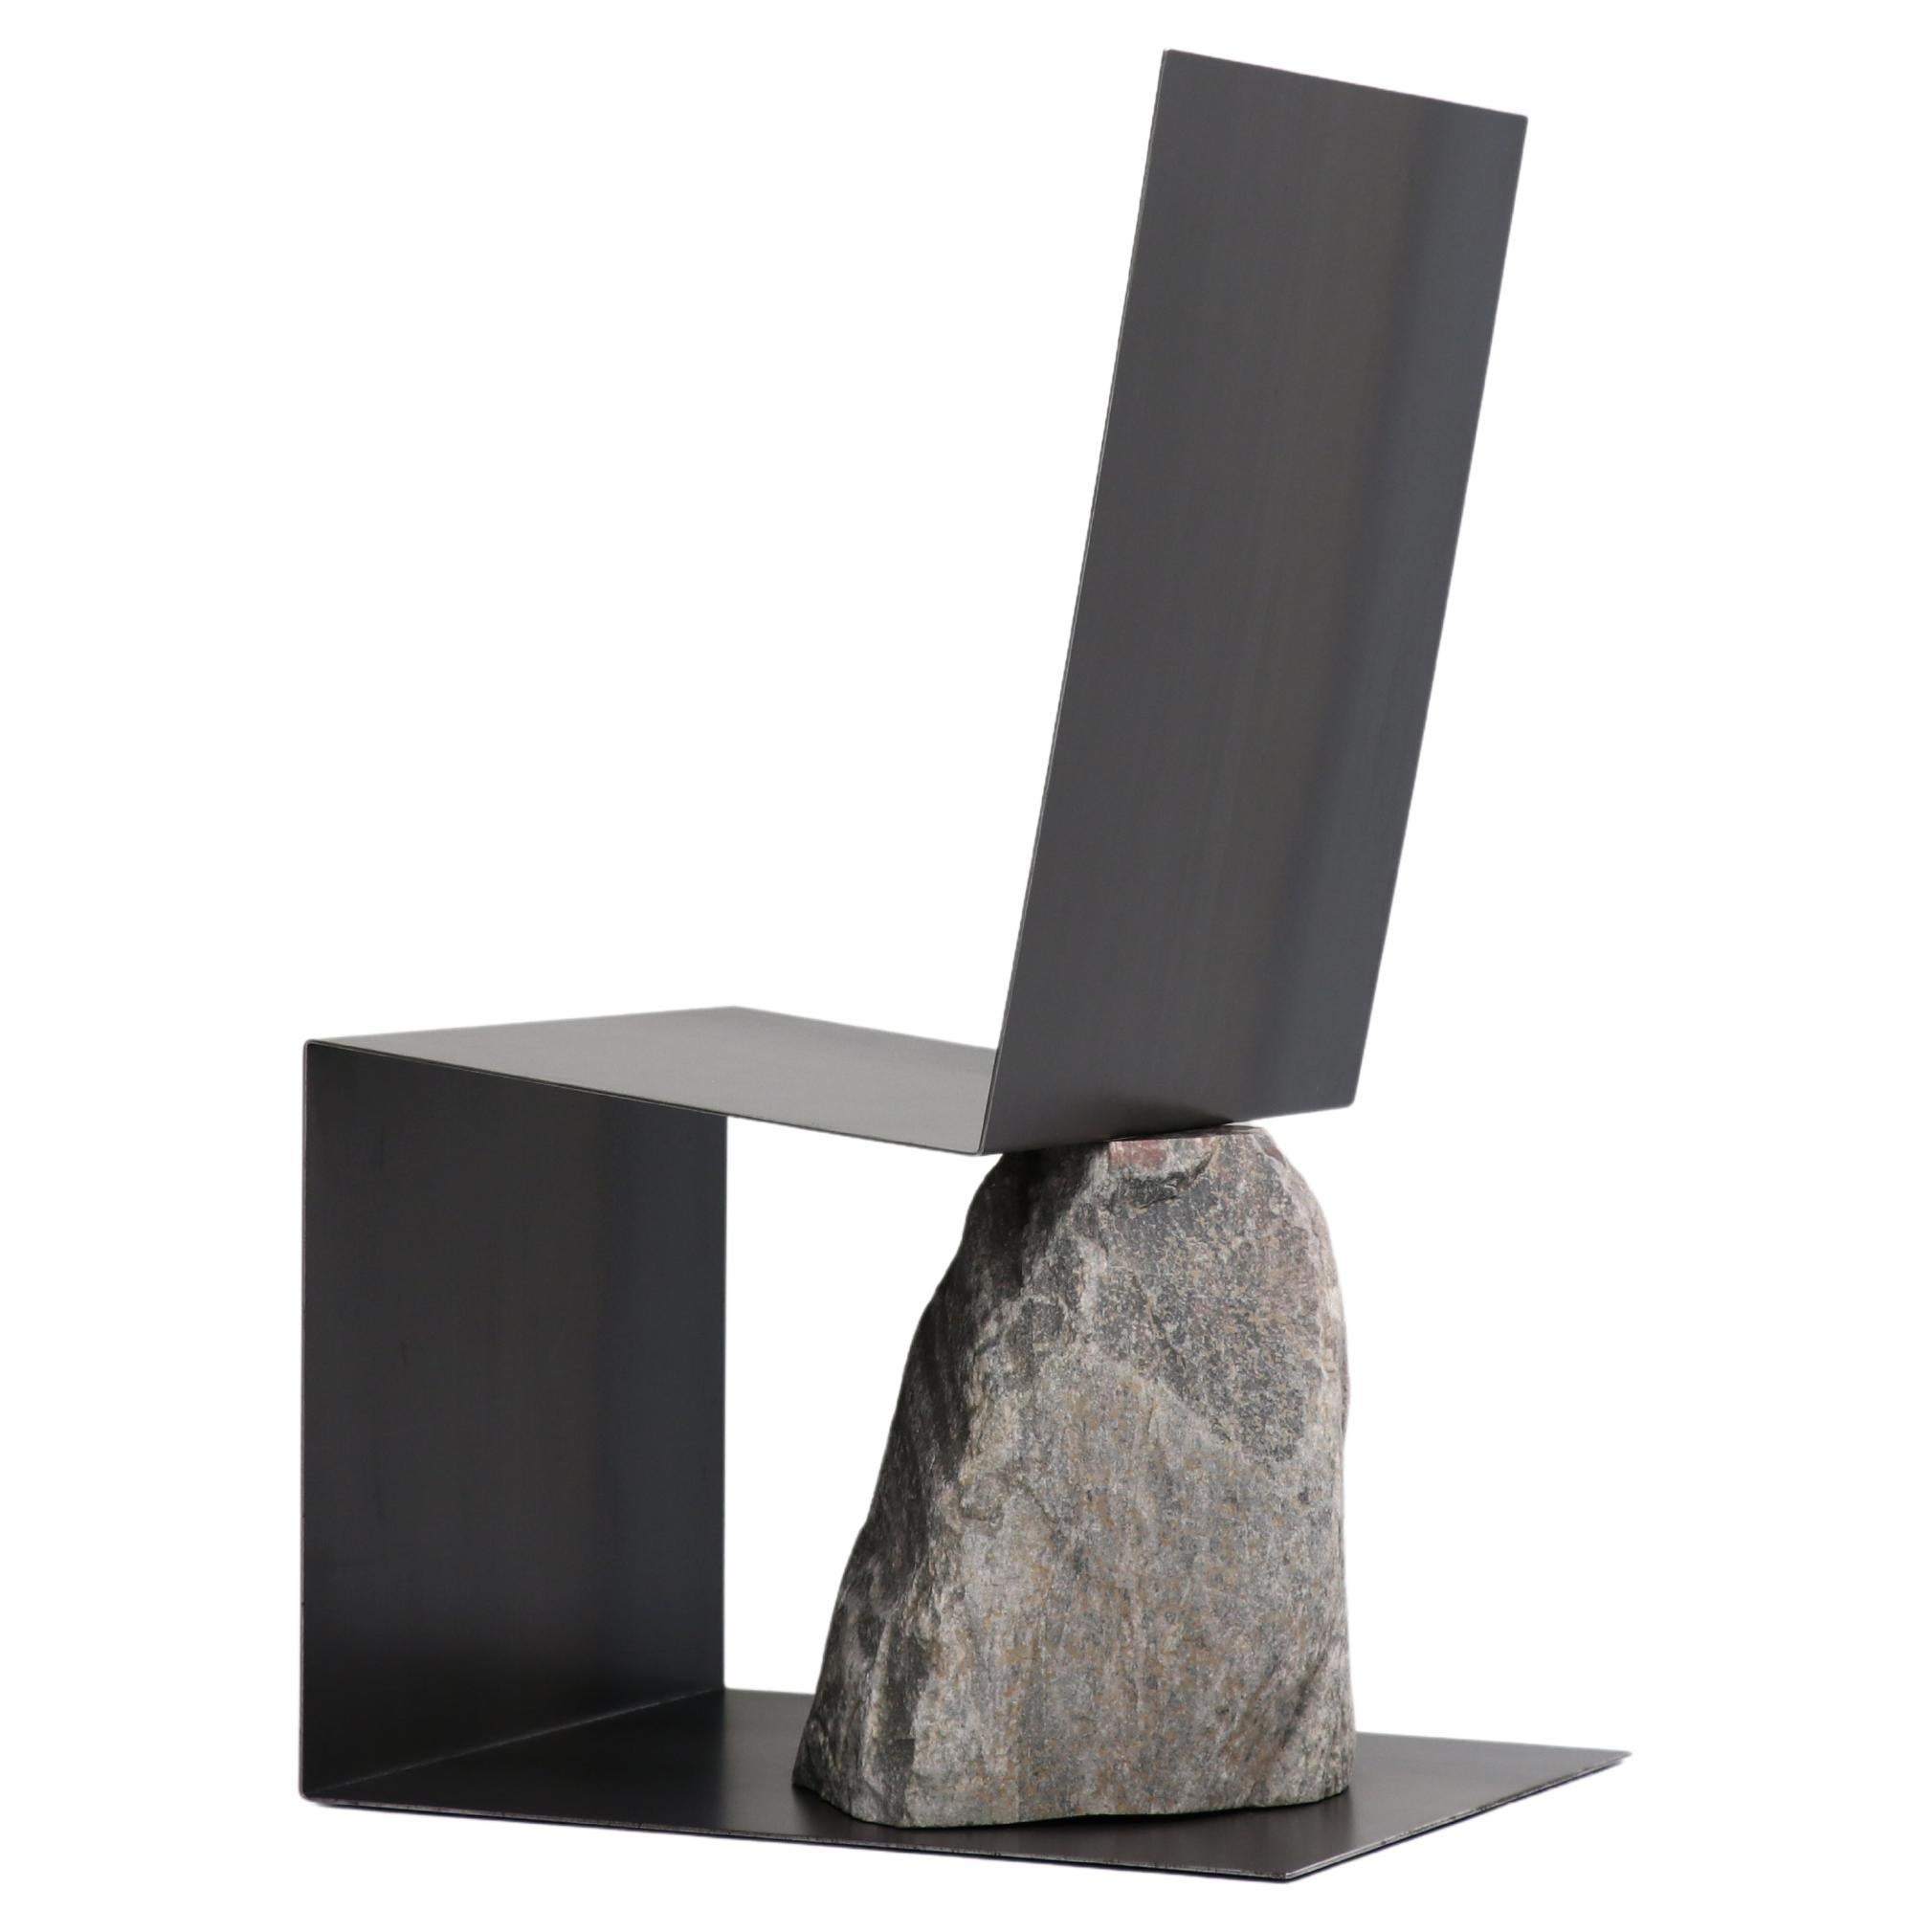 Steel and Stone Chair by Batten and Kamp